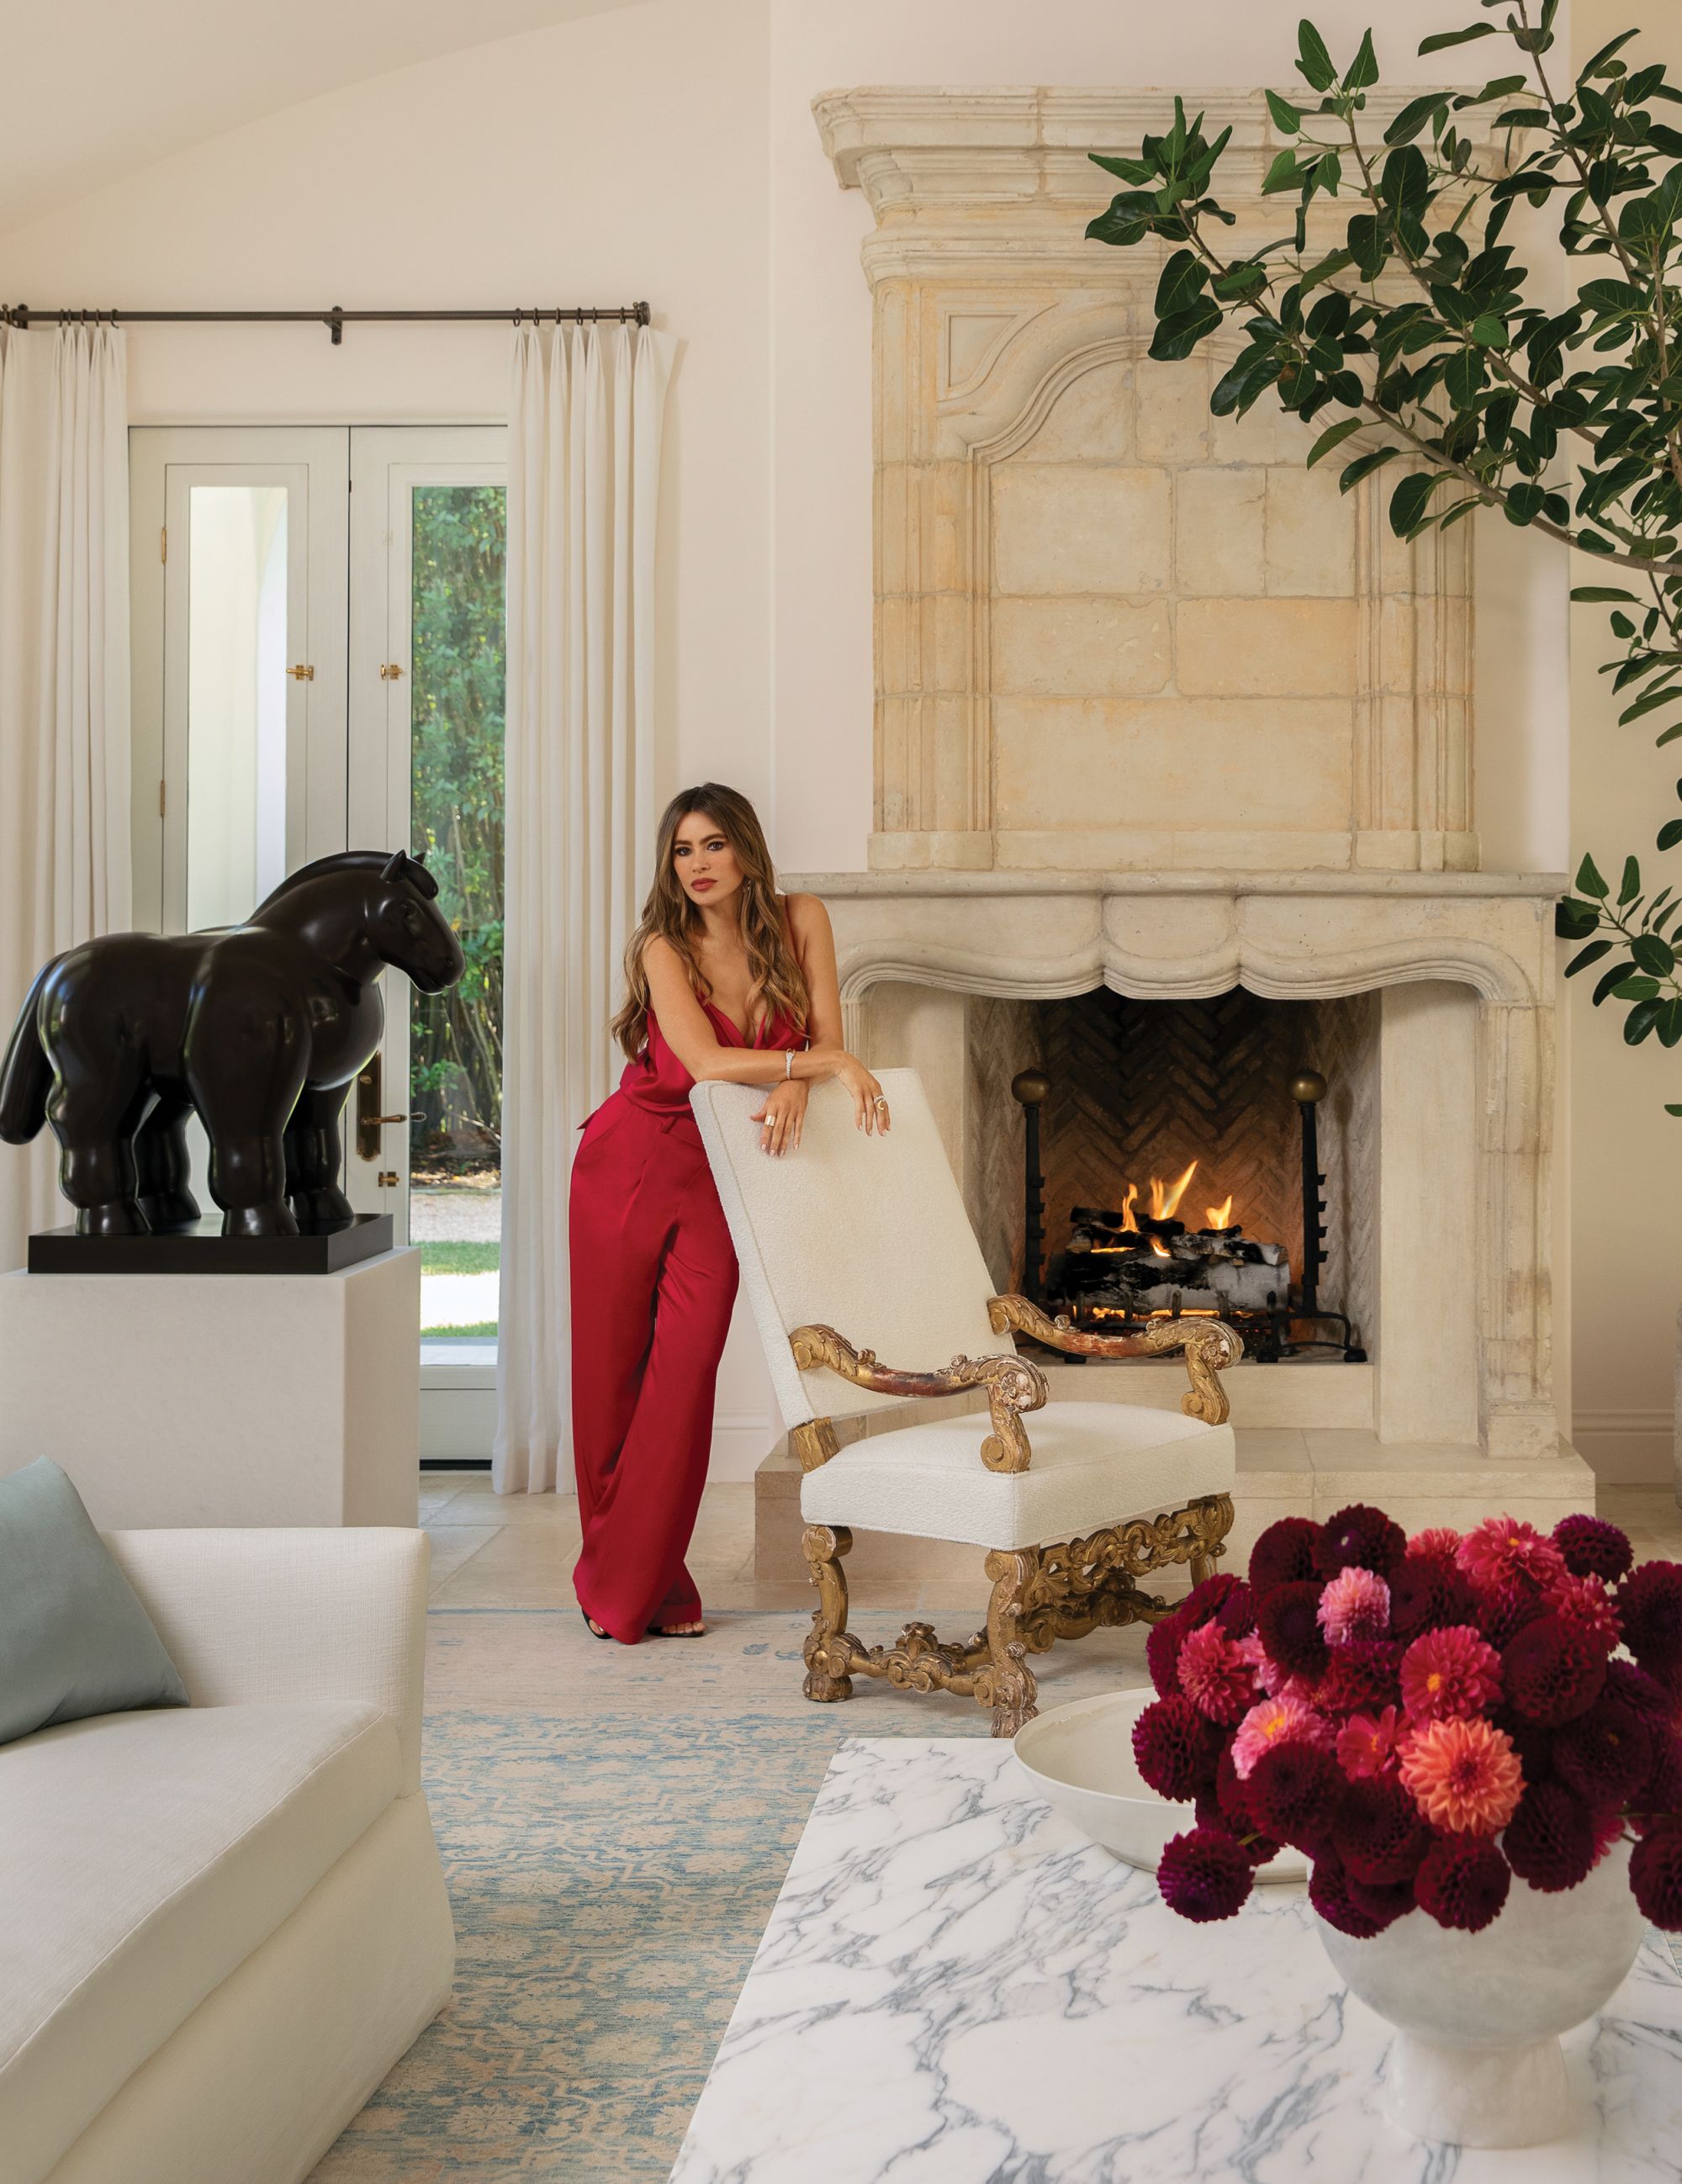 An 18th-century limestone fireplace lights up the living room in Sofia Vergara's home.